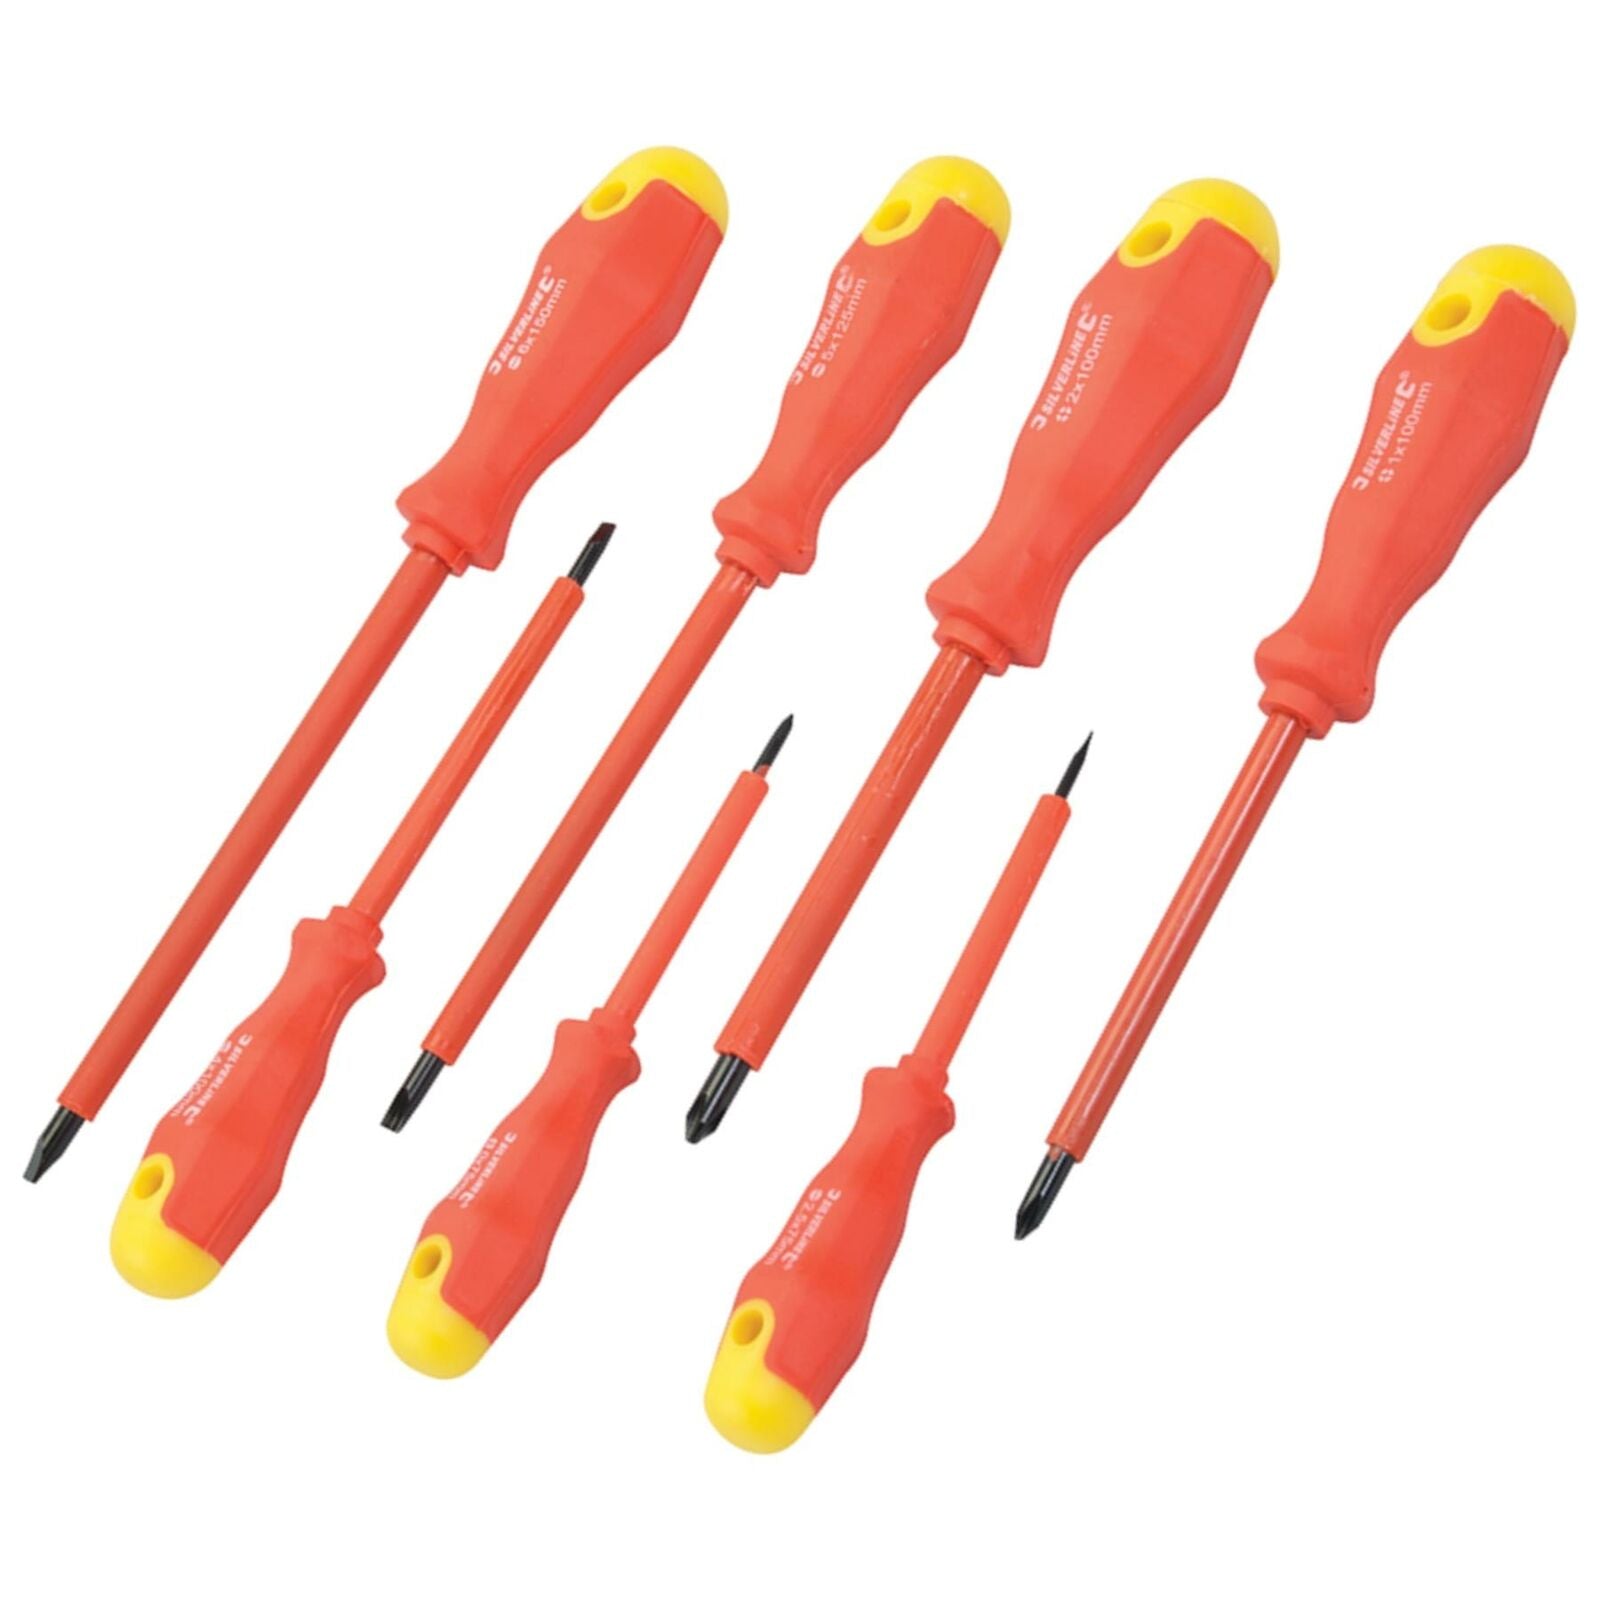 Silverline 7pc Insulated Magnetic Soft Grip Screwdriver Phillips Flat Set